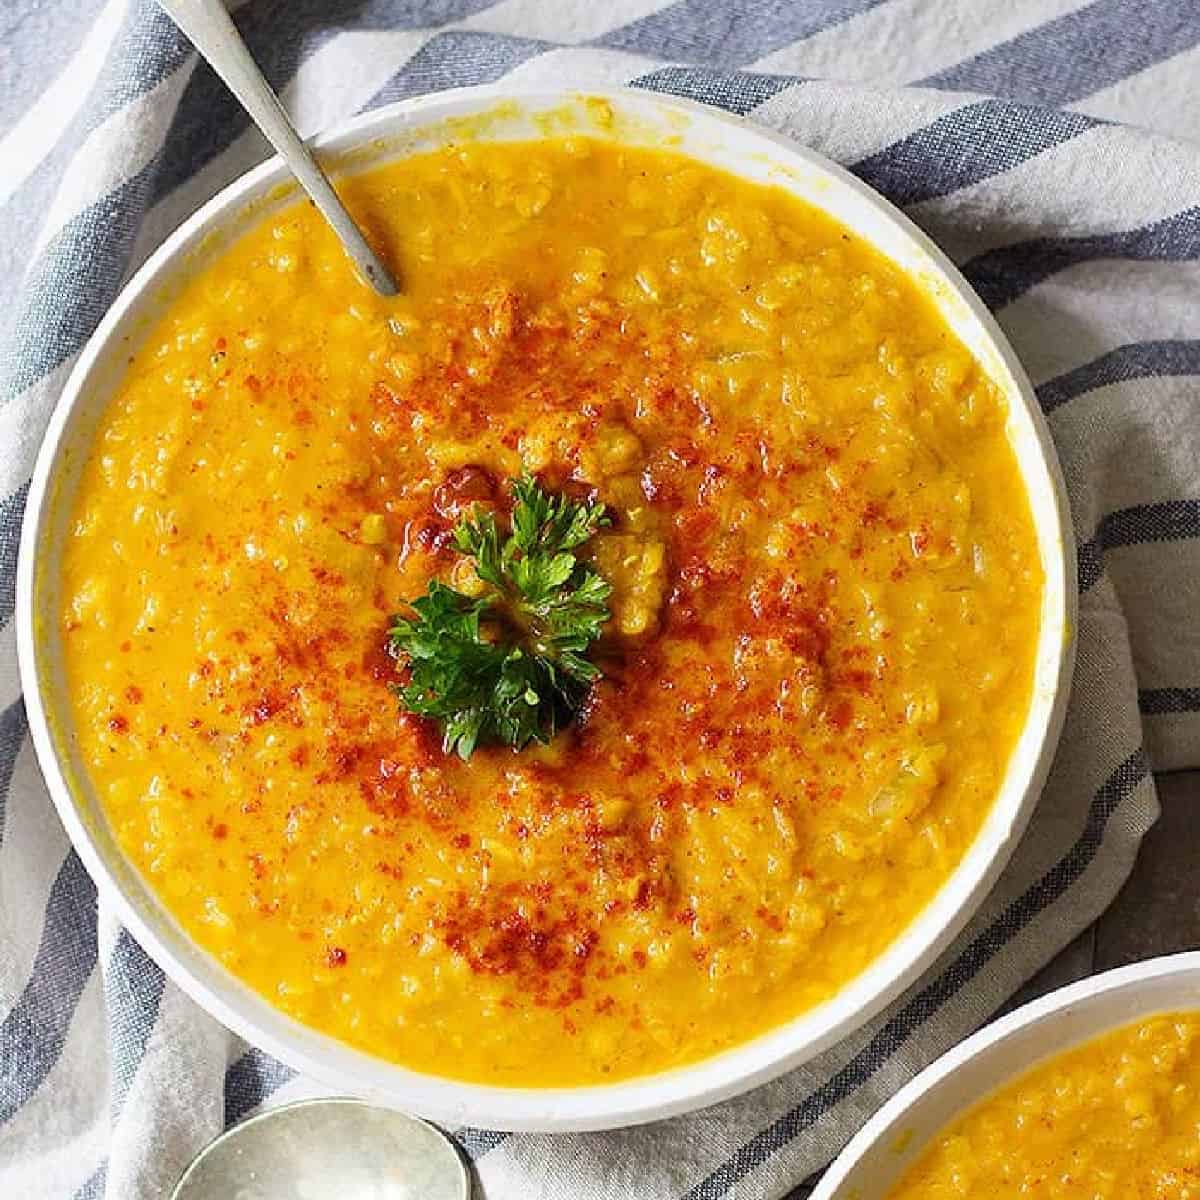 Ready in only 30 minutes, this turmeric ginger red lentil soup is everyone's favorite. This is a healthy and hearty soup recipe that's full of flavor!
